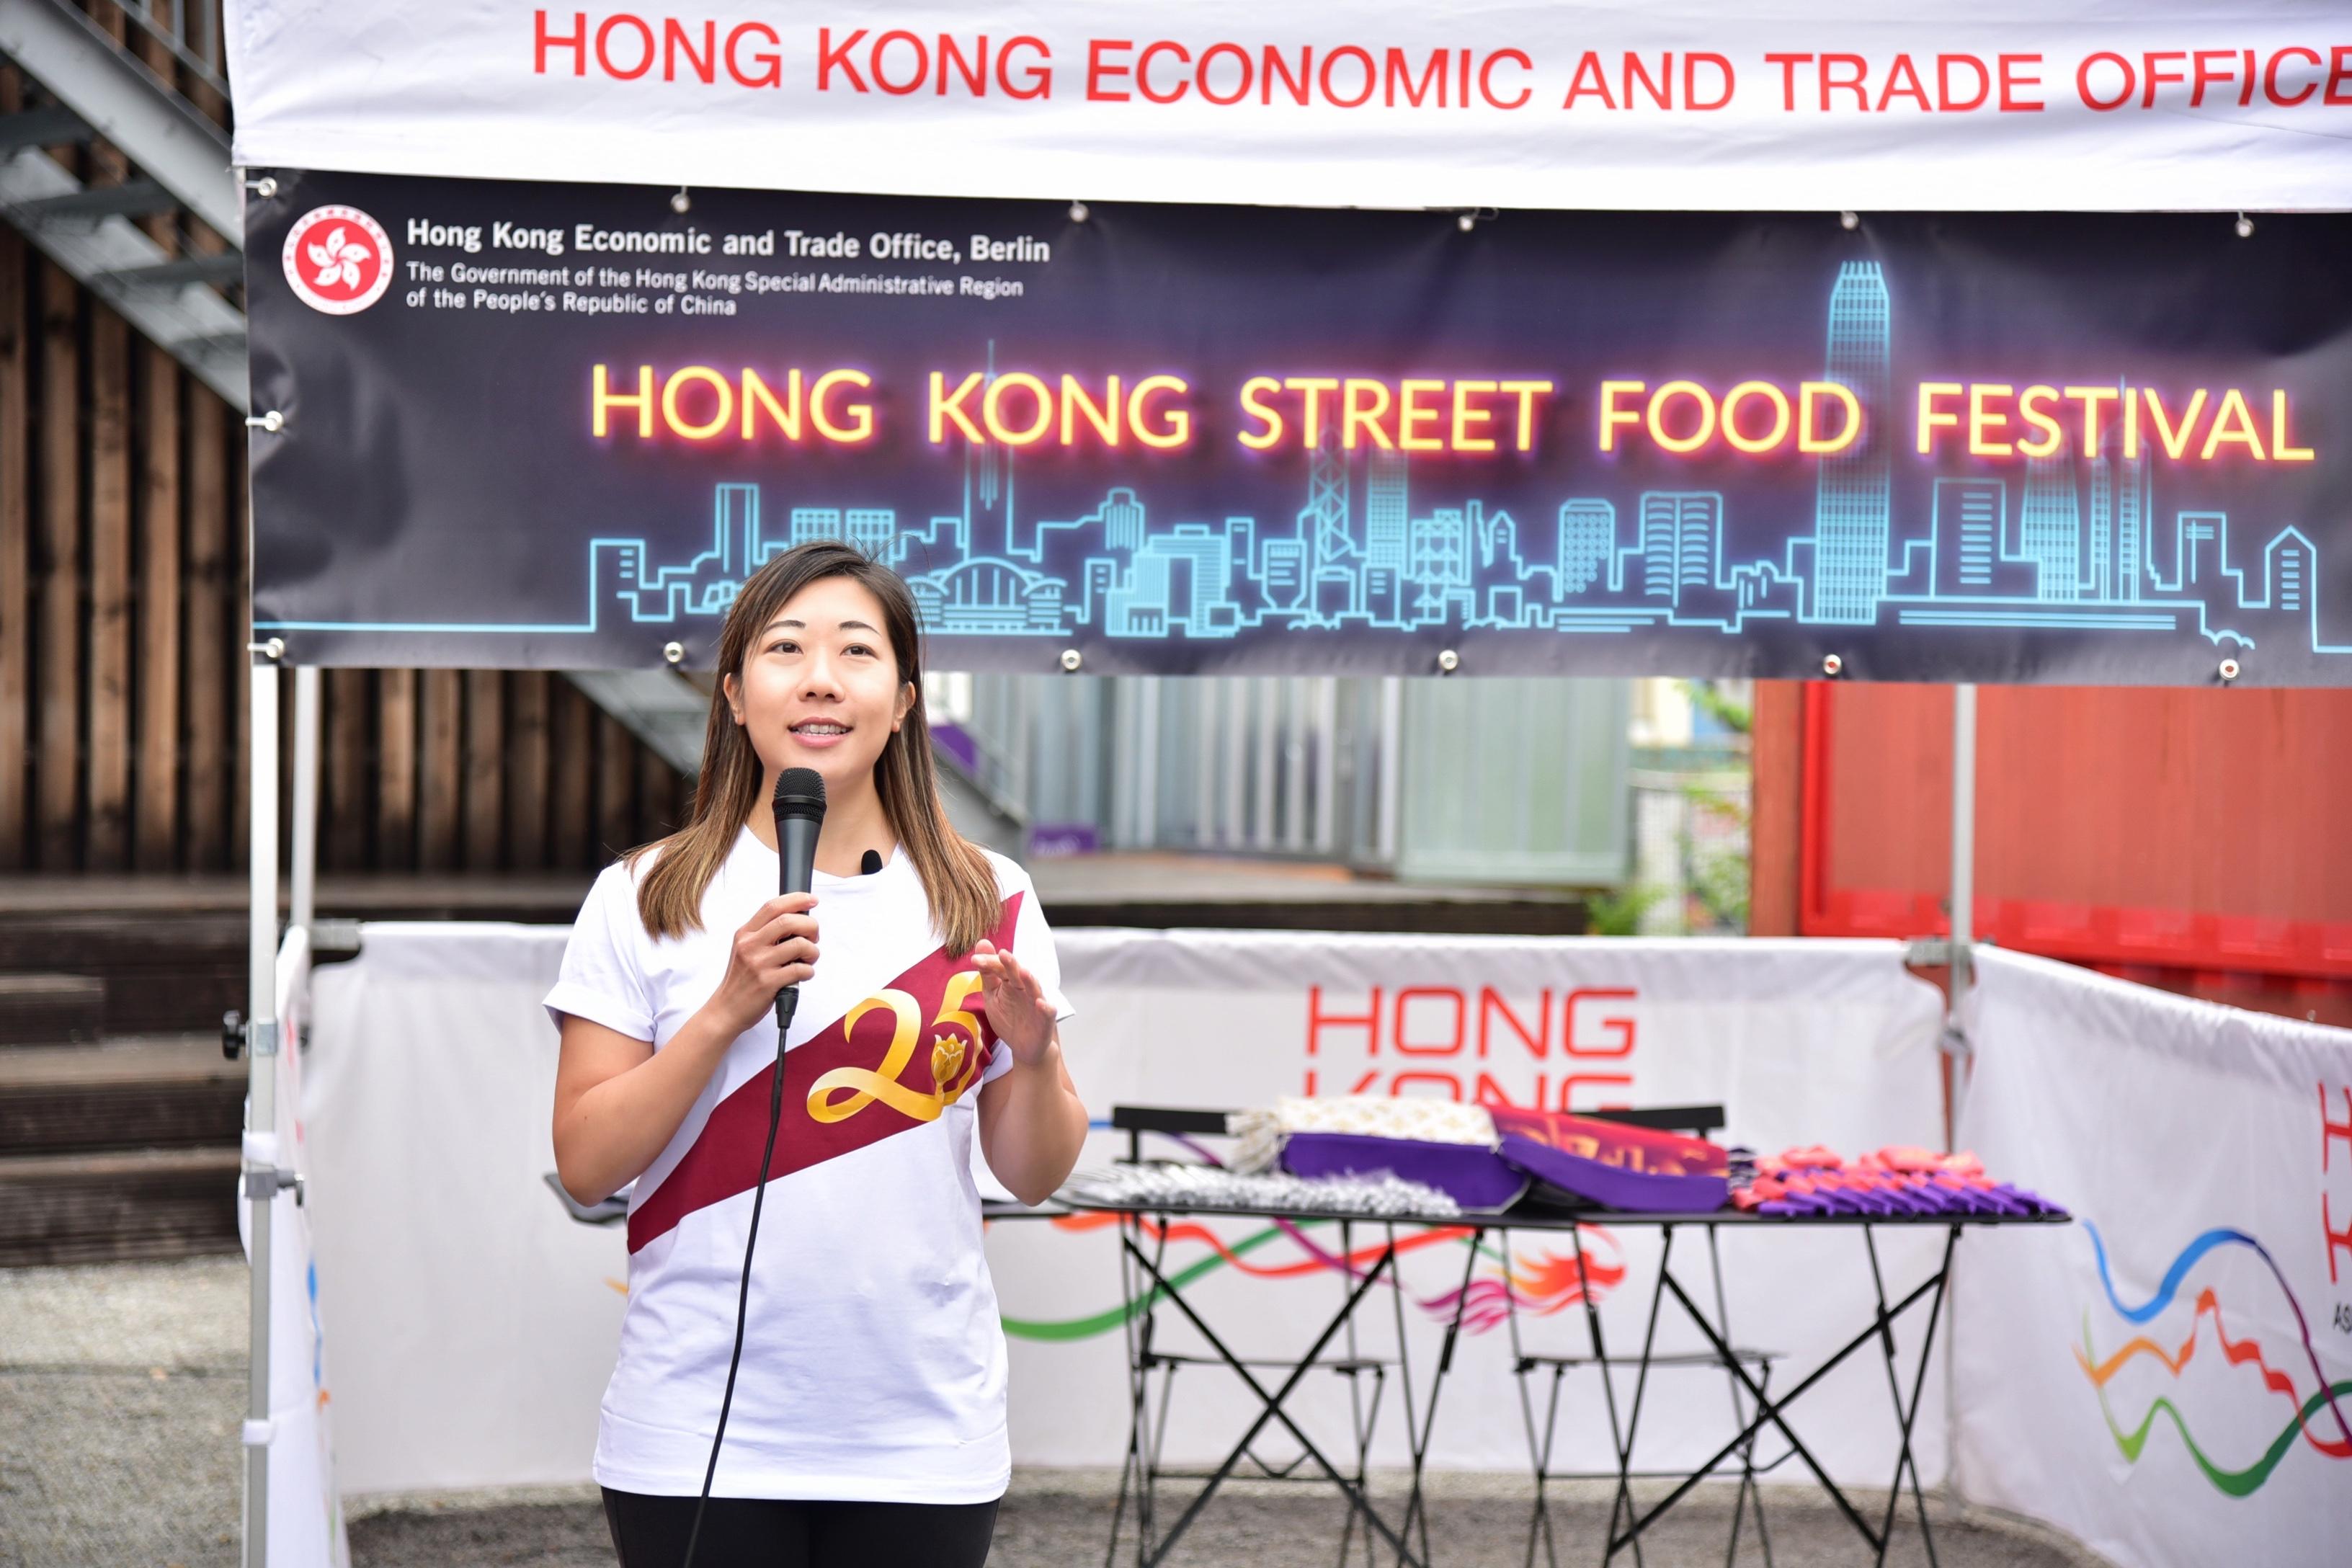 The Director of the Hong Kong Economic and Trade Office, Berlin, Ms Jenny Szeto, speaks at the Hong Kong Street Food Festival pavilion in Berlin, Germany, on July 7 (Berlin time).